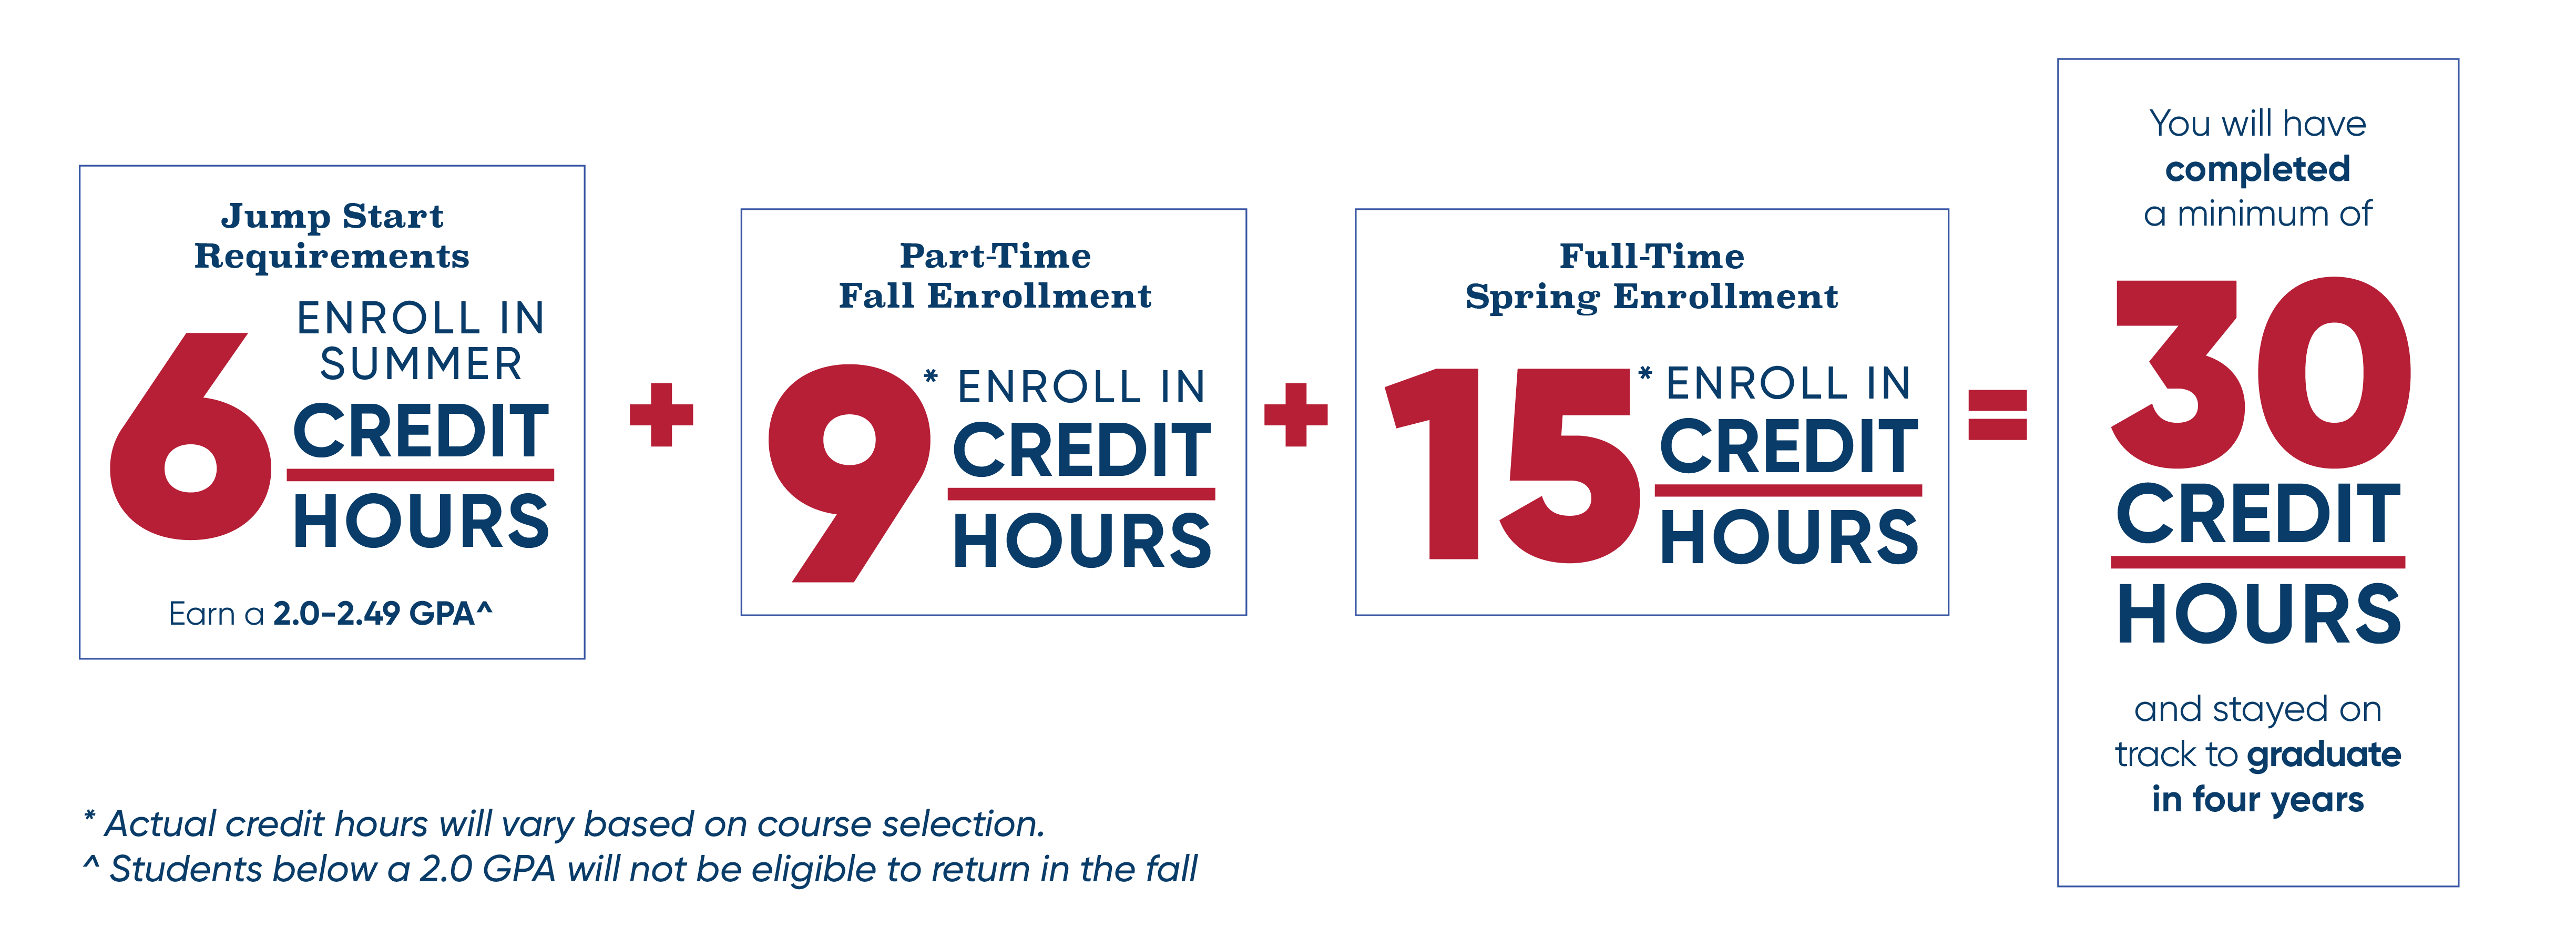 6 + 9 + 15 = 30 credit hours